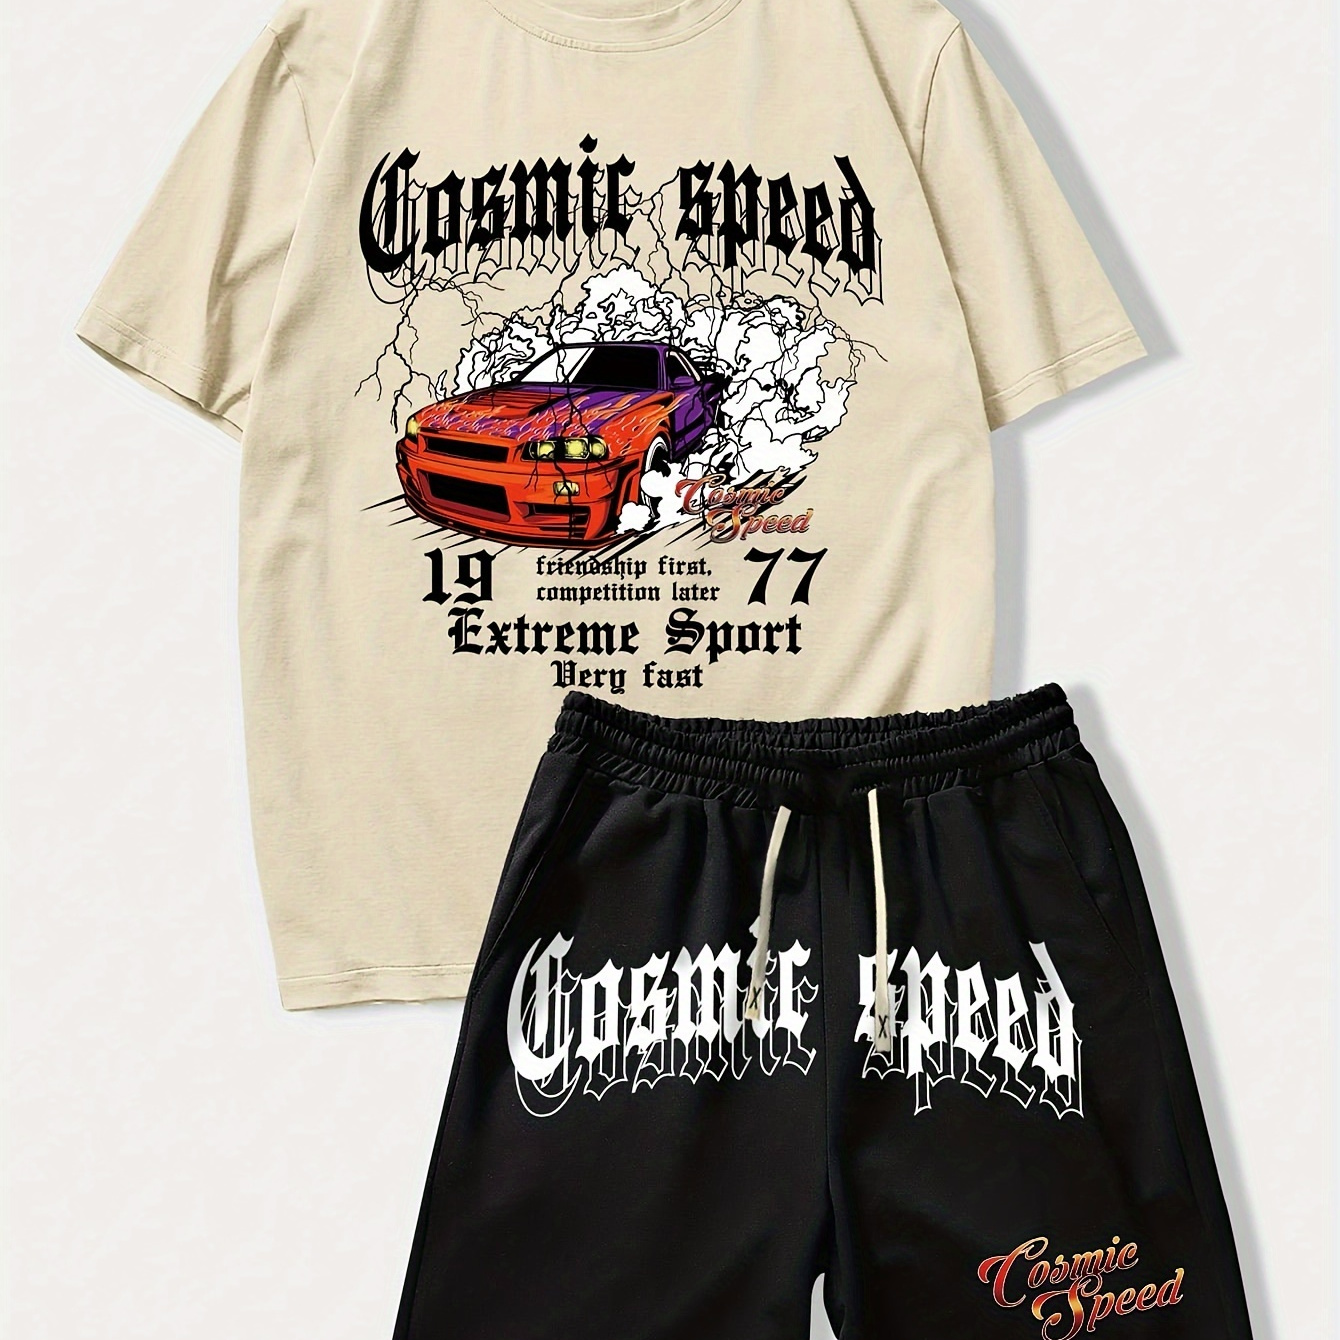 

Cosmic Speed Letter Car Graphic Print Men's 2 Pieces Outfits, Crew Neck Short Sleeve T-shirt & Drawstring Shorts For Summer, Casual Comfy Versatile Co Ord Set For Outdoor Sports & Beach Holiday